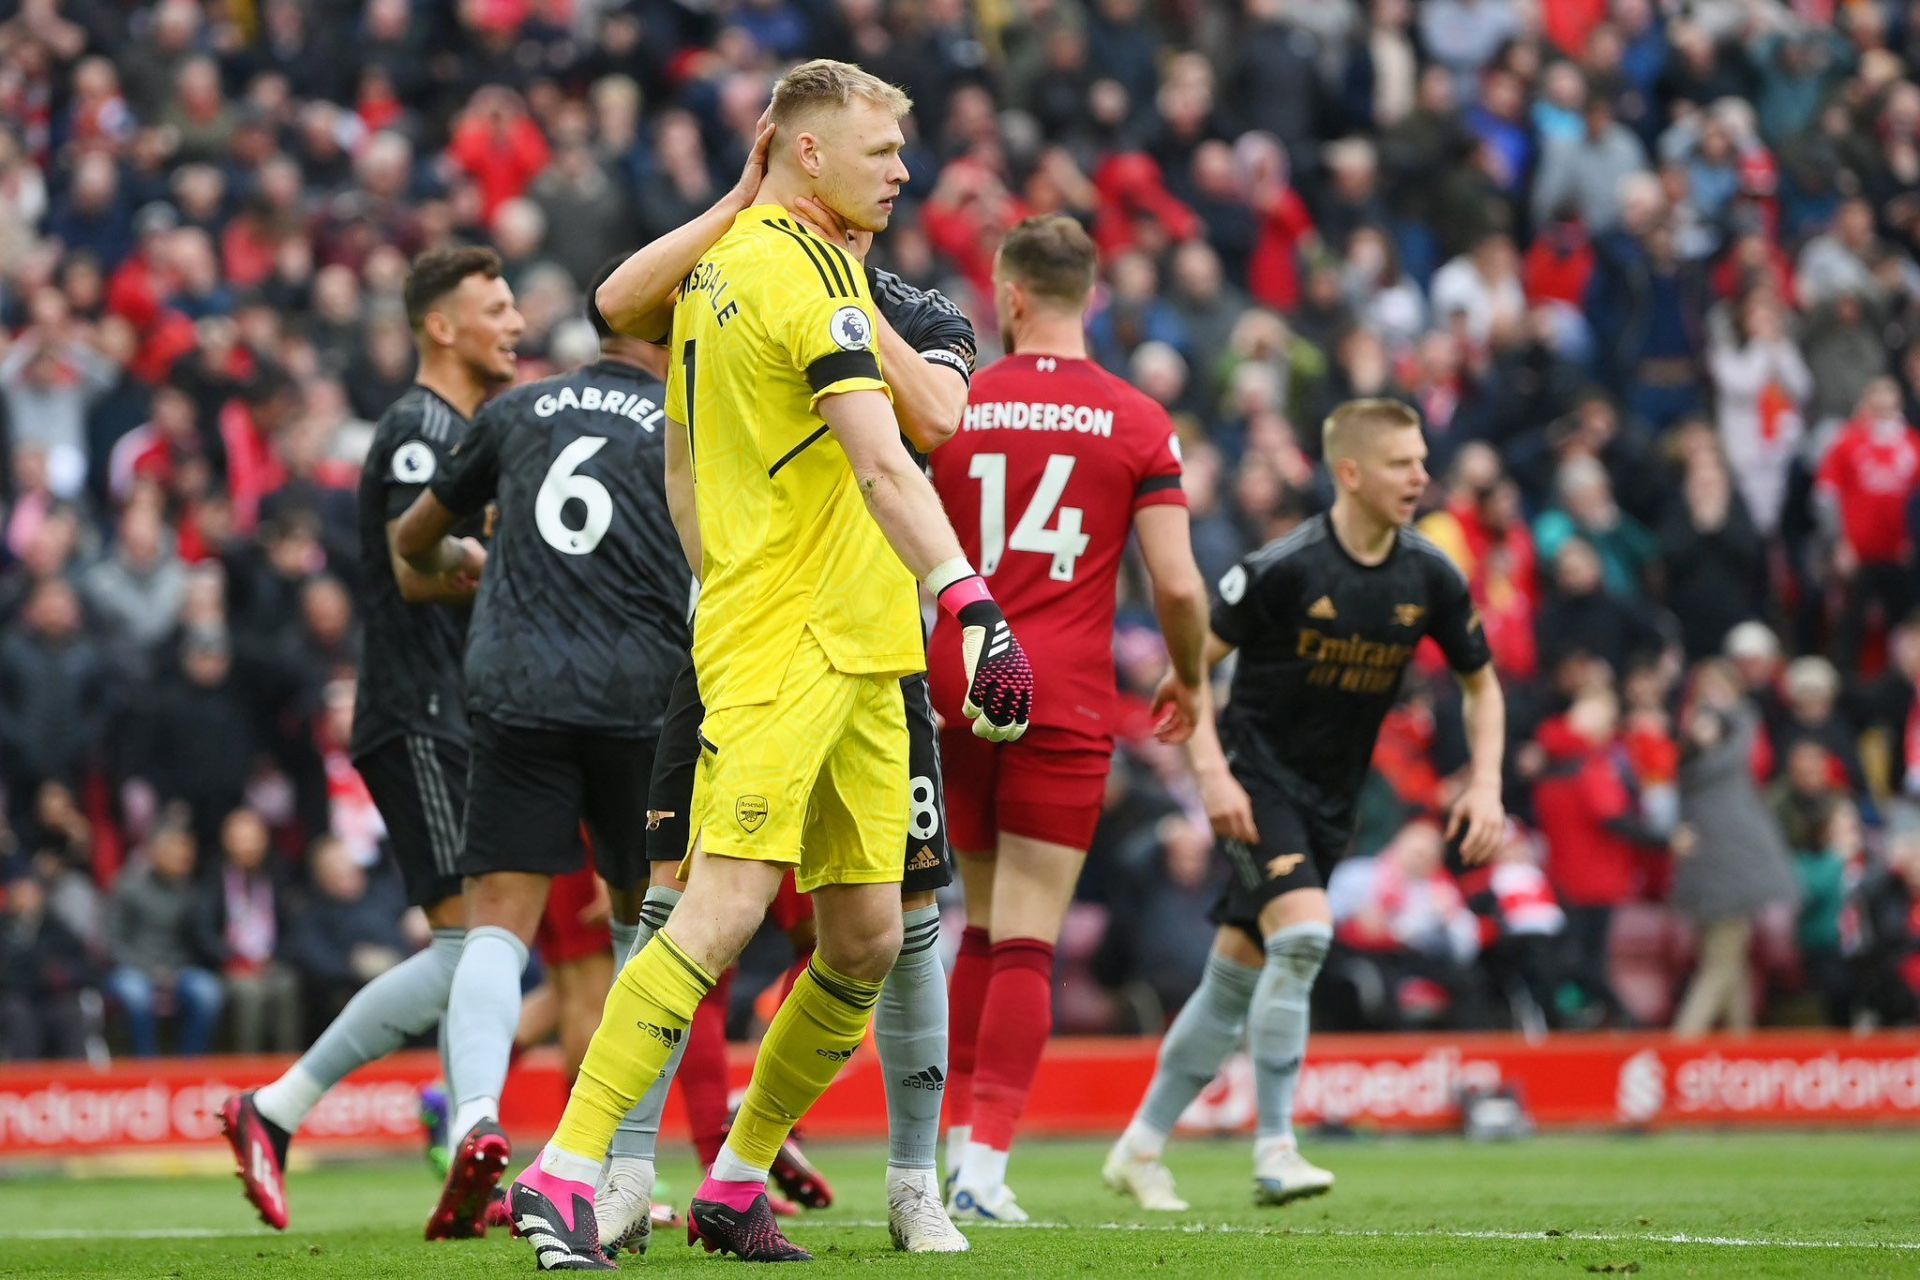 Arsenal threw away a two-goal lead to draw with Liverpool at Anfield